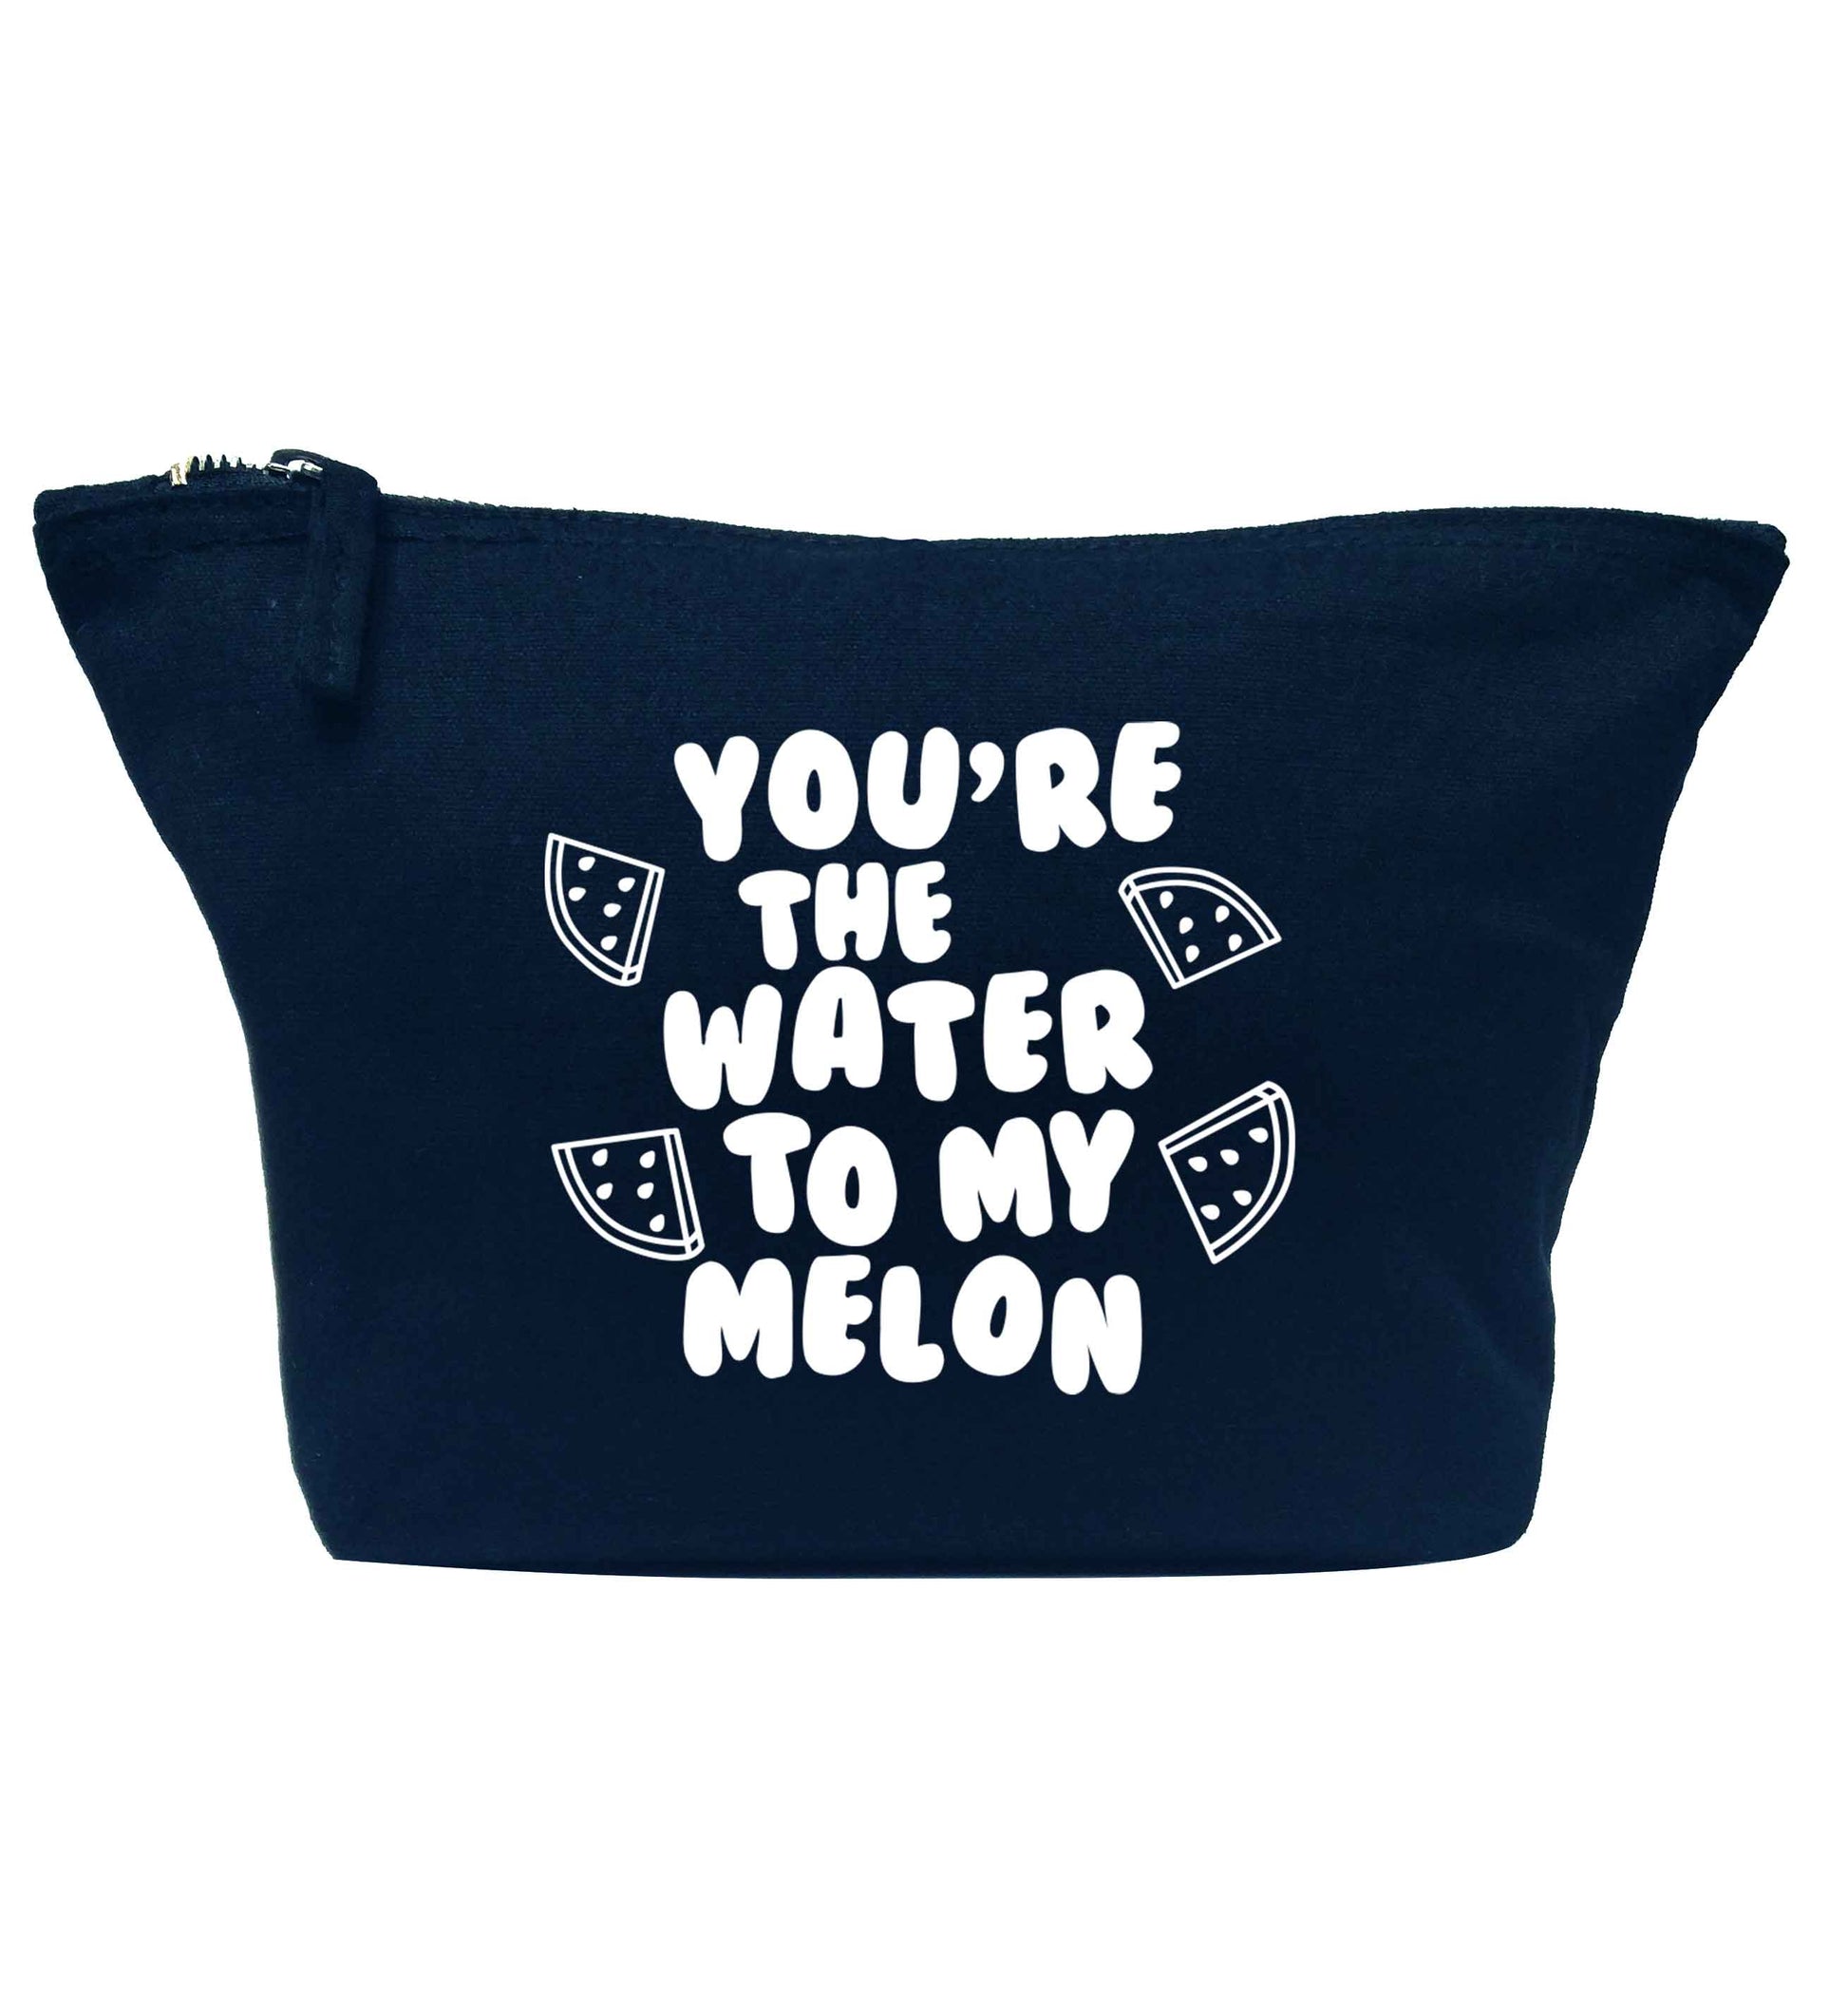 You're the water to my melon navy makeup bag